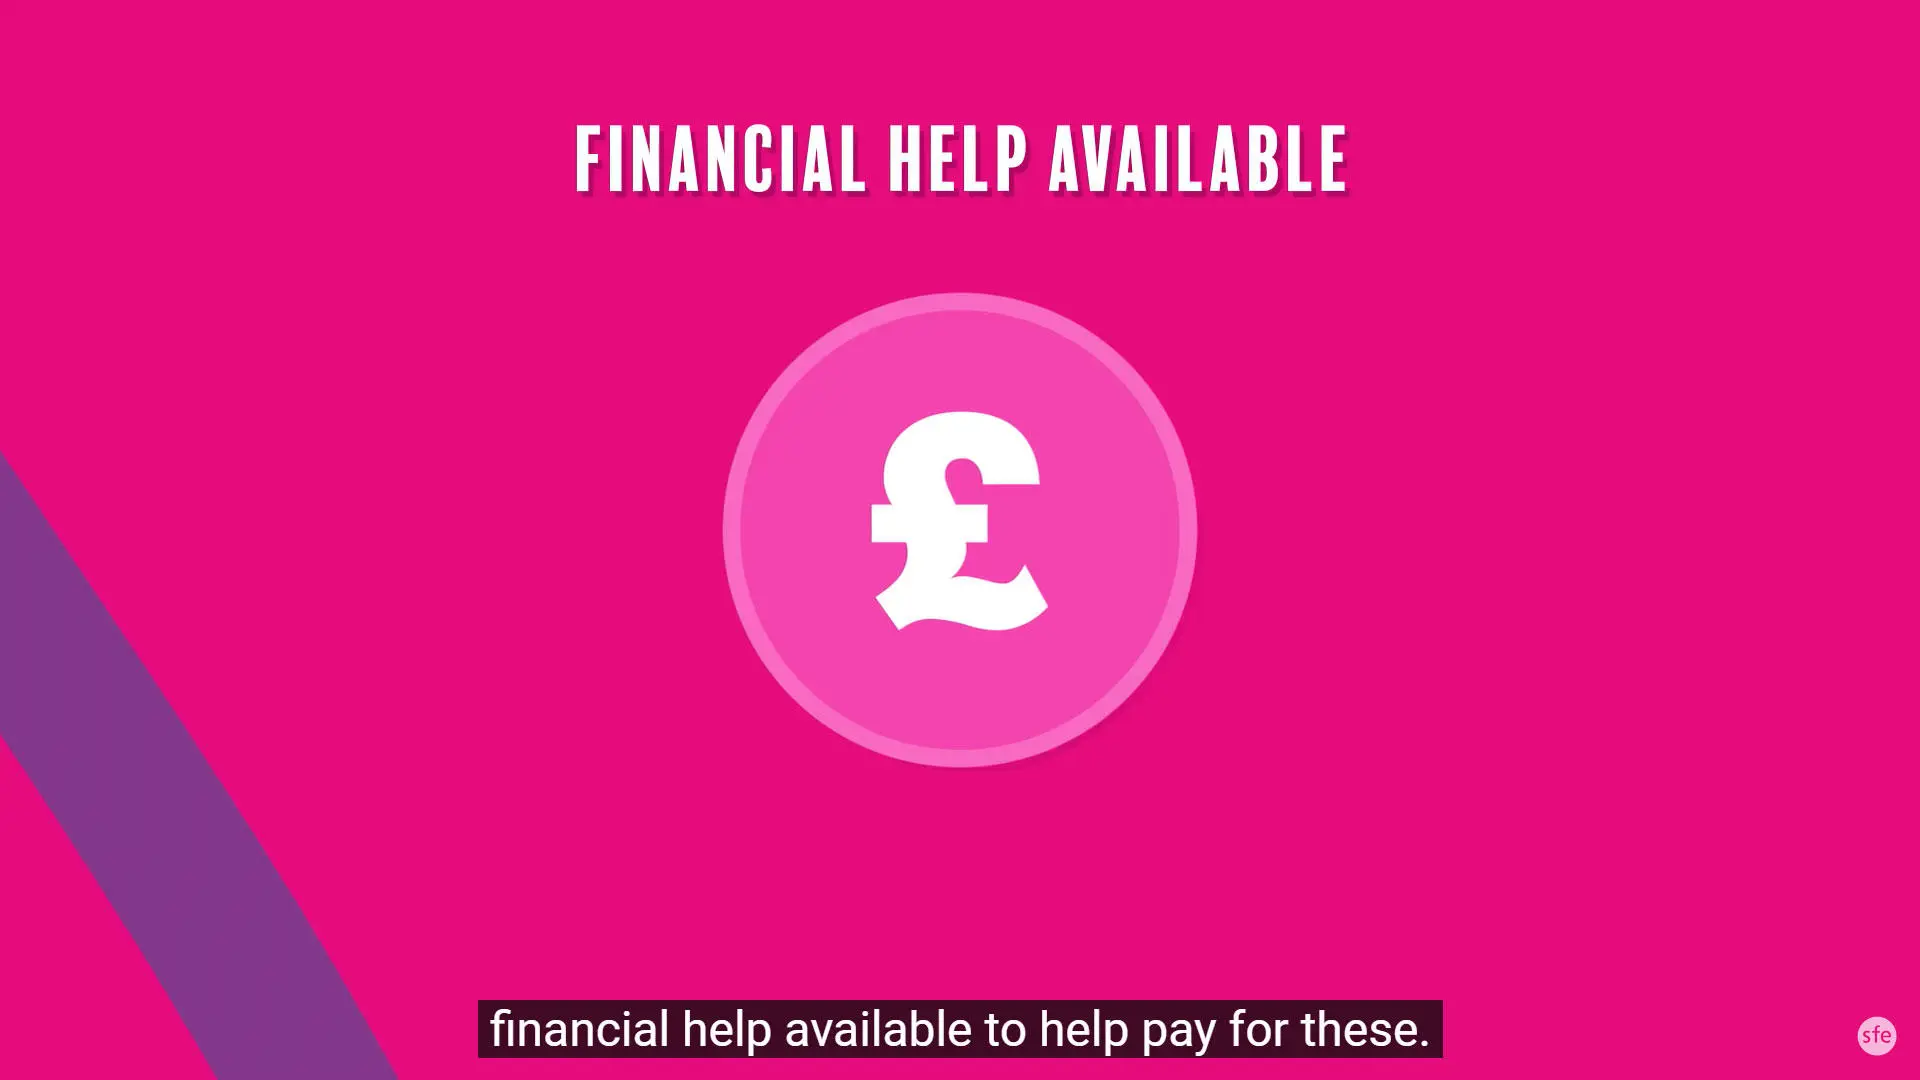 Screenshot from the SFE video showing the words 'Financial help available' and a pound sign in a circle